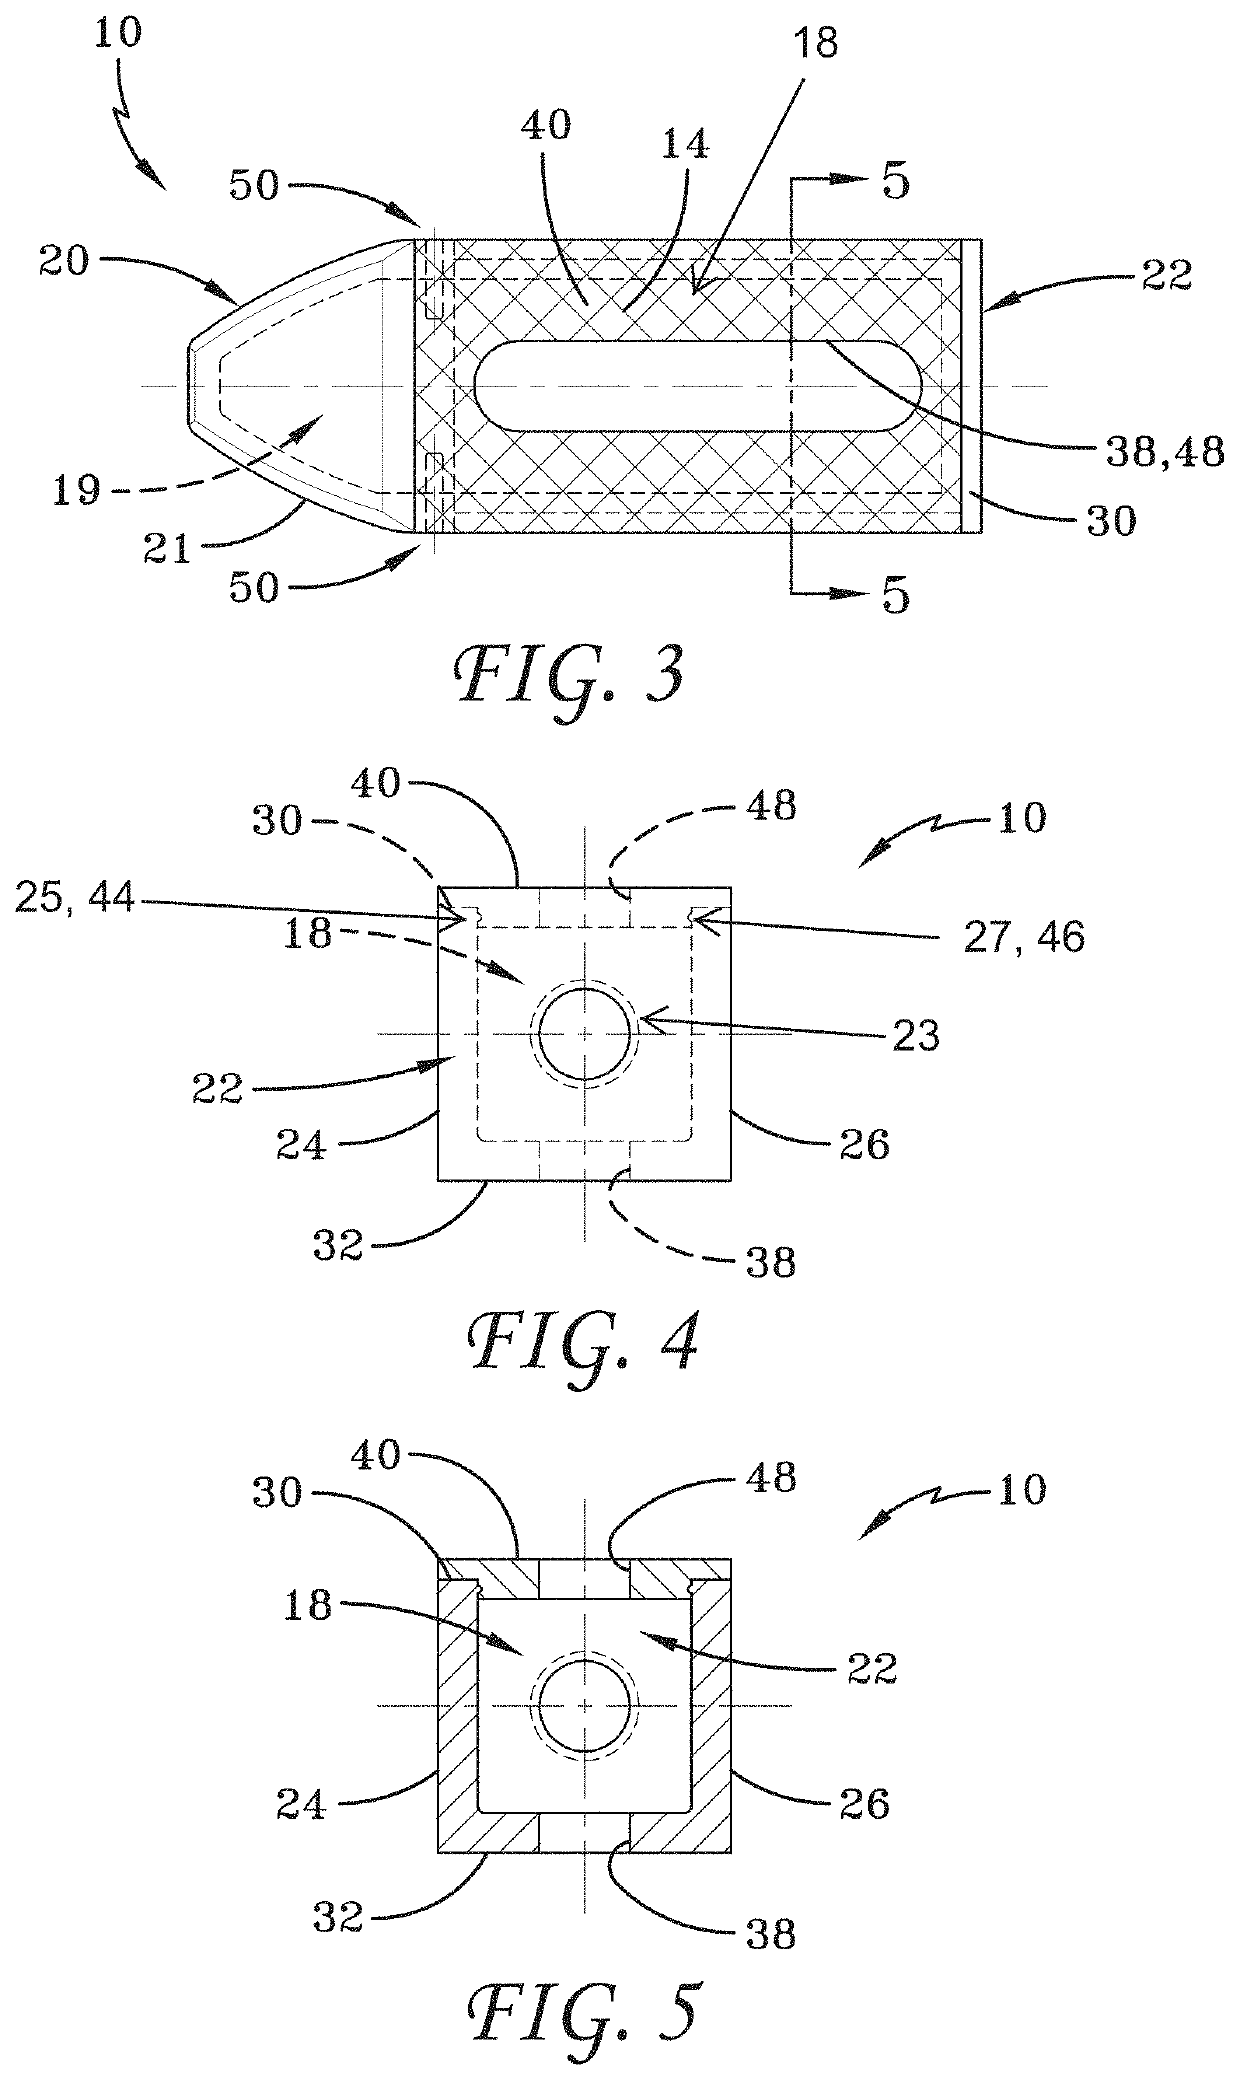 Spinal implant device